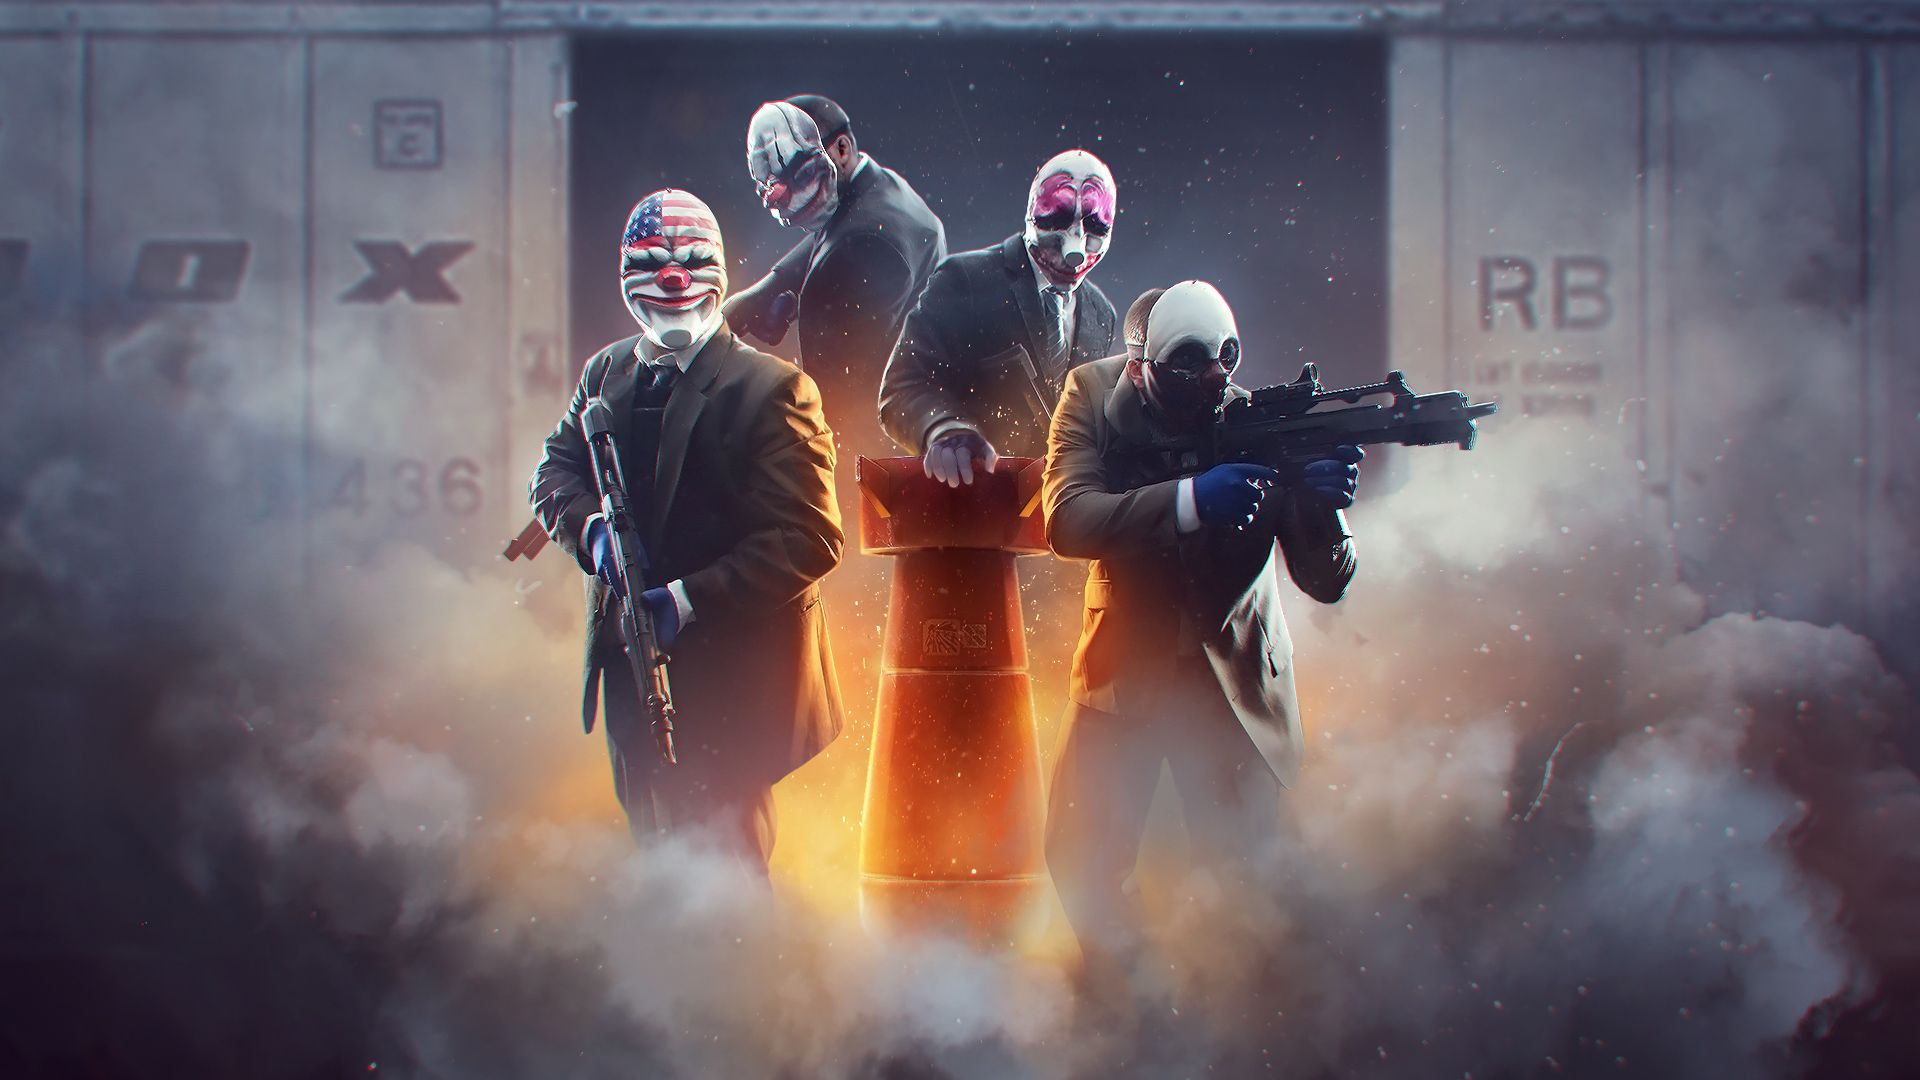 Chains Payday Dallas Payday Hoxton Payday Payday 2 Wolf Payday 1920x1080